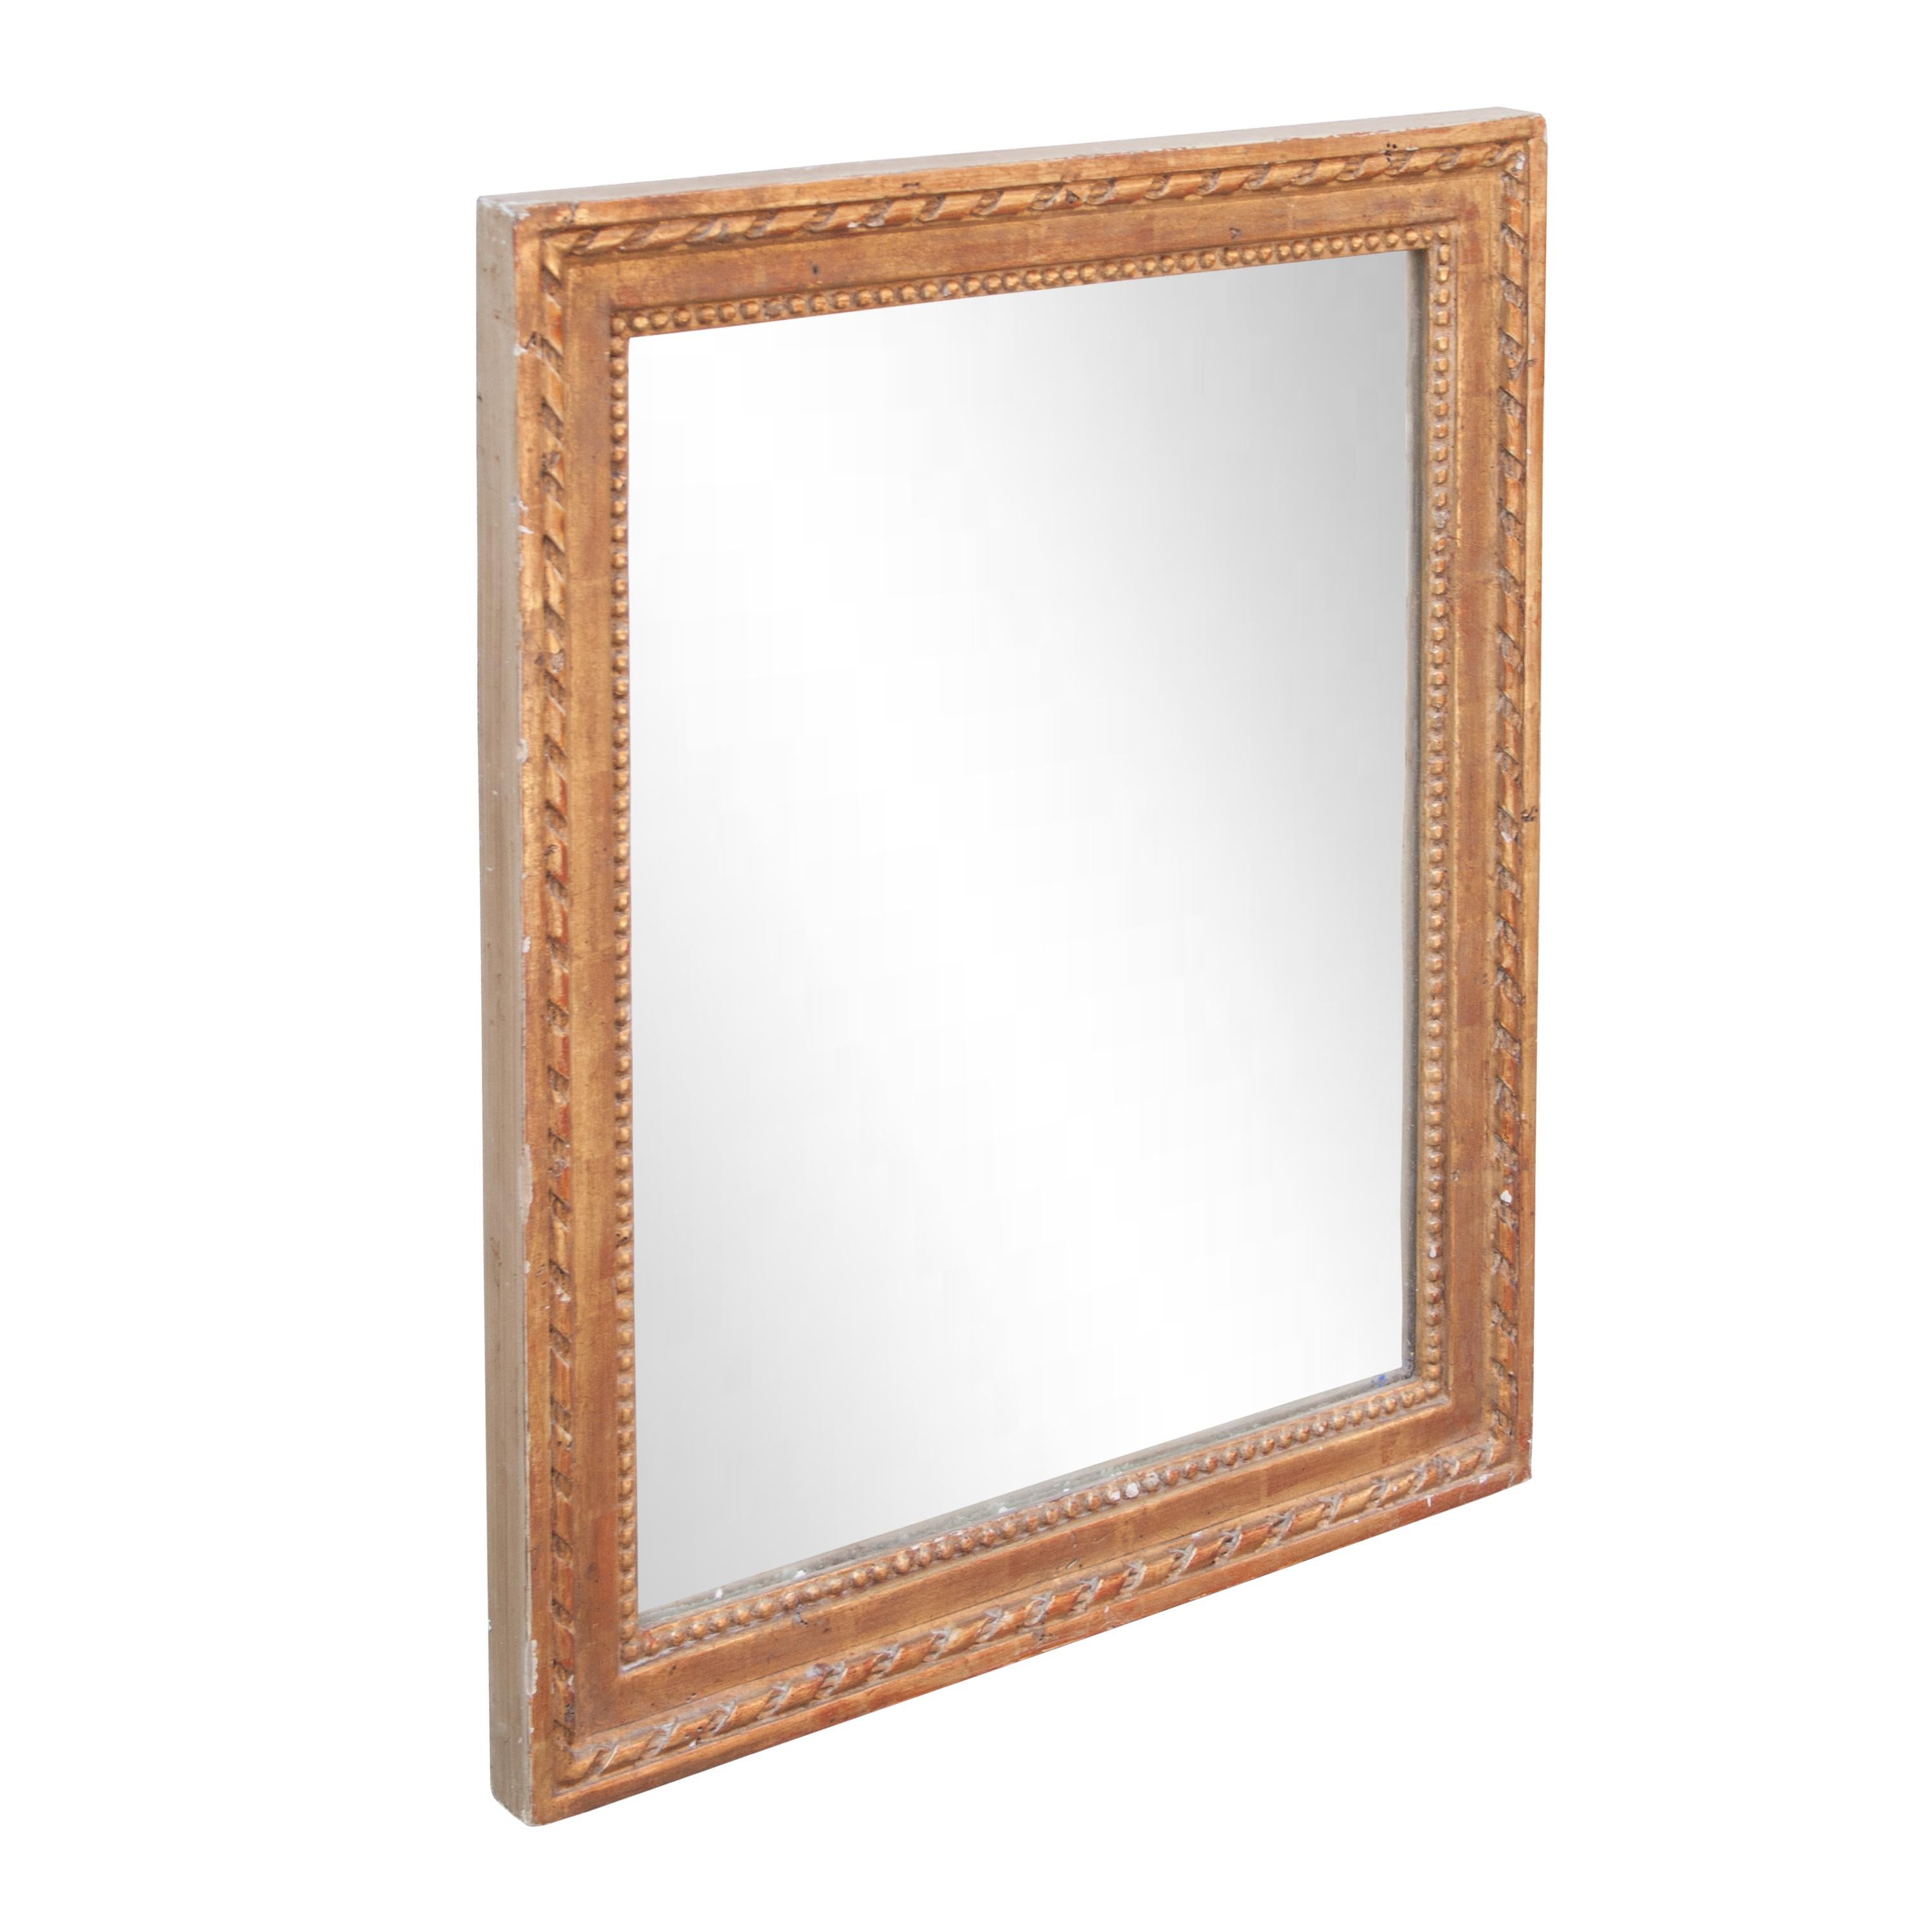 Empire style handcrafted mirror. Rectangular hand carved wooden structure with gold foiled finished.